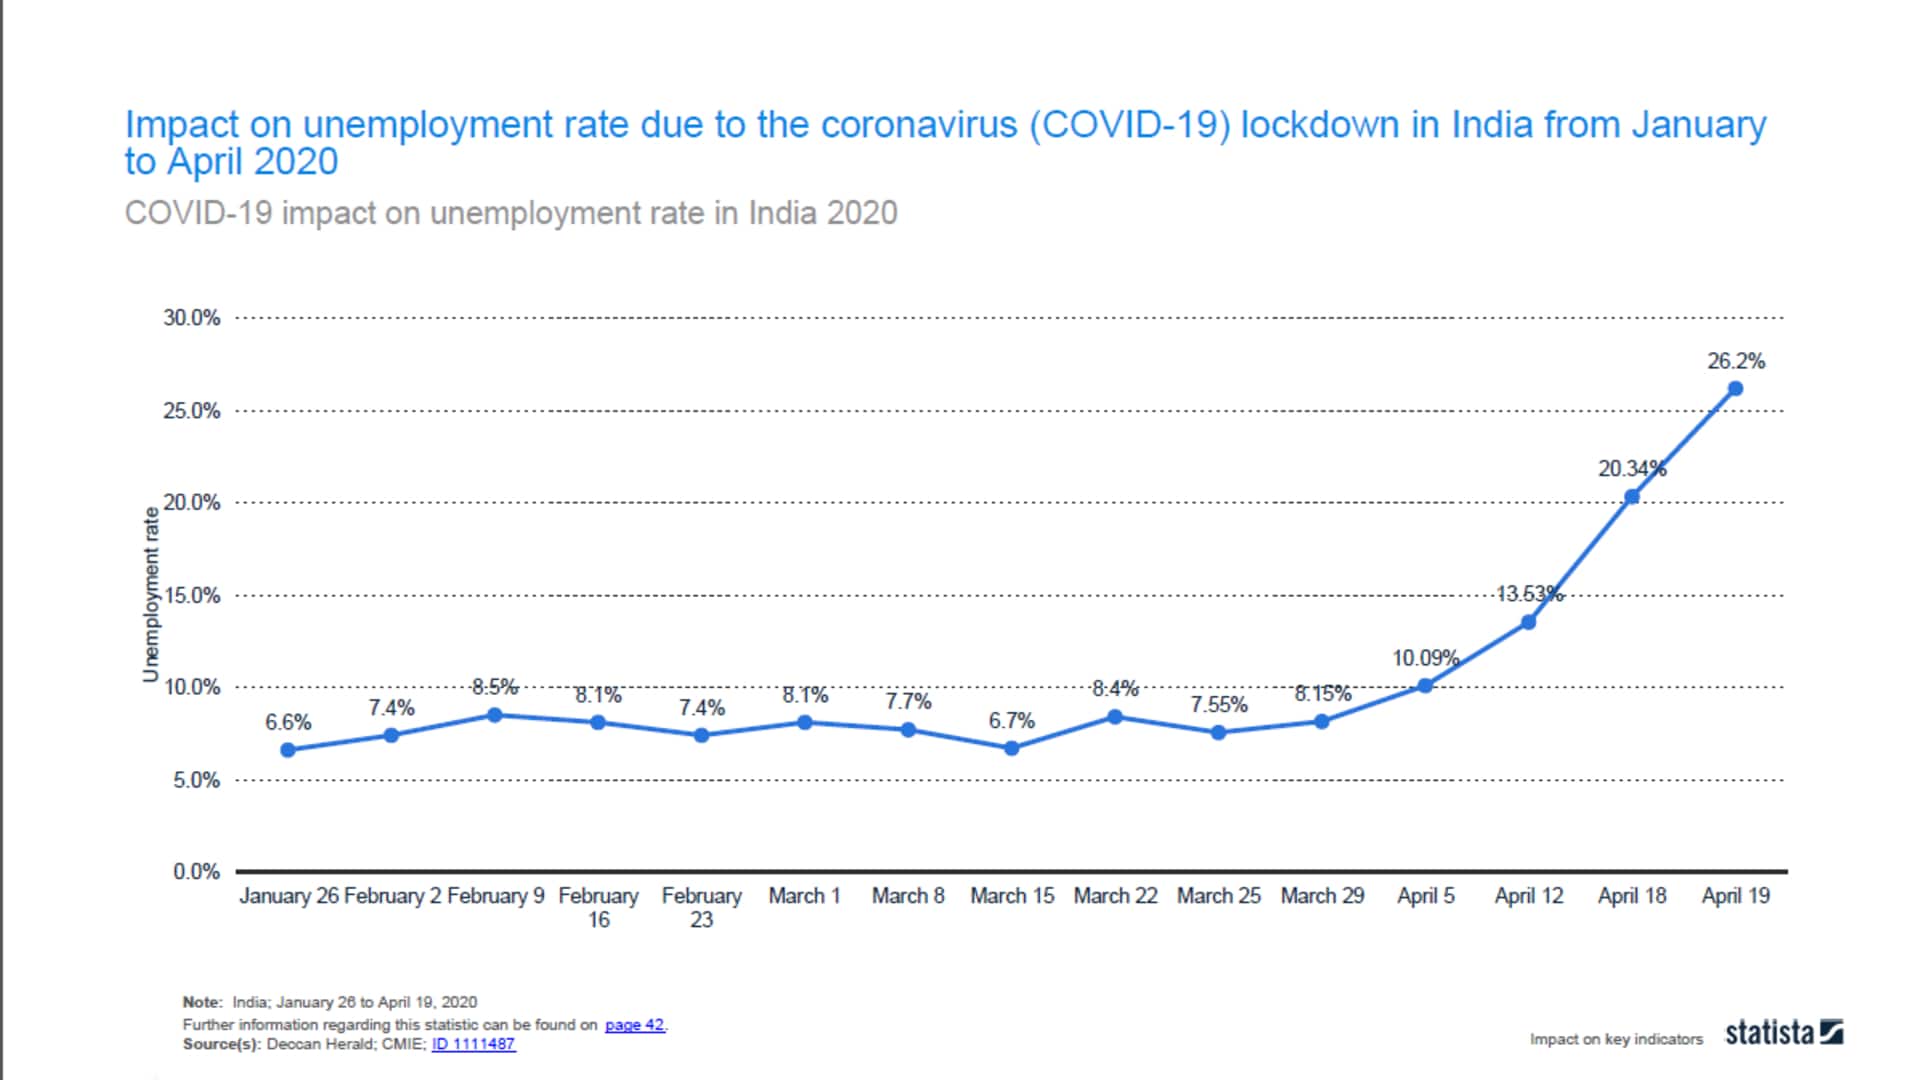 https://images.moneycontrol.com/static-mcnews/2020/05/6.-Impact-on-unemployment-rate-due-to-the-coronavirus-COVID-19-lockdown-in-India-from-January-to-April-2020.jpg